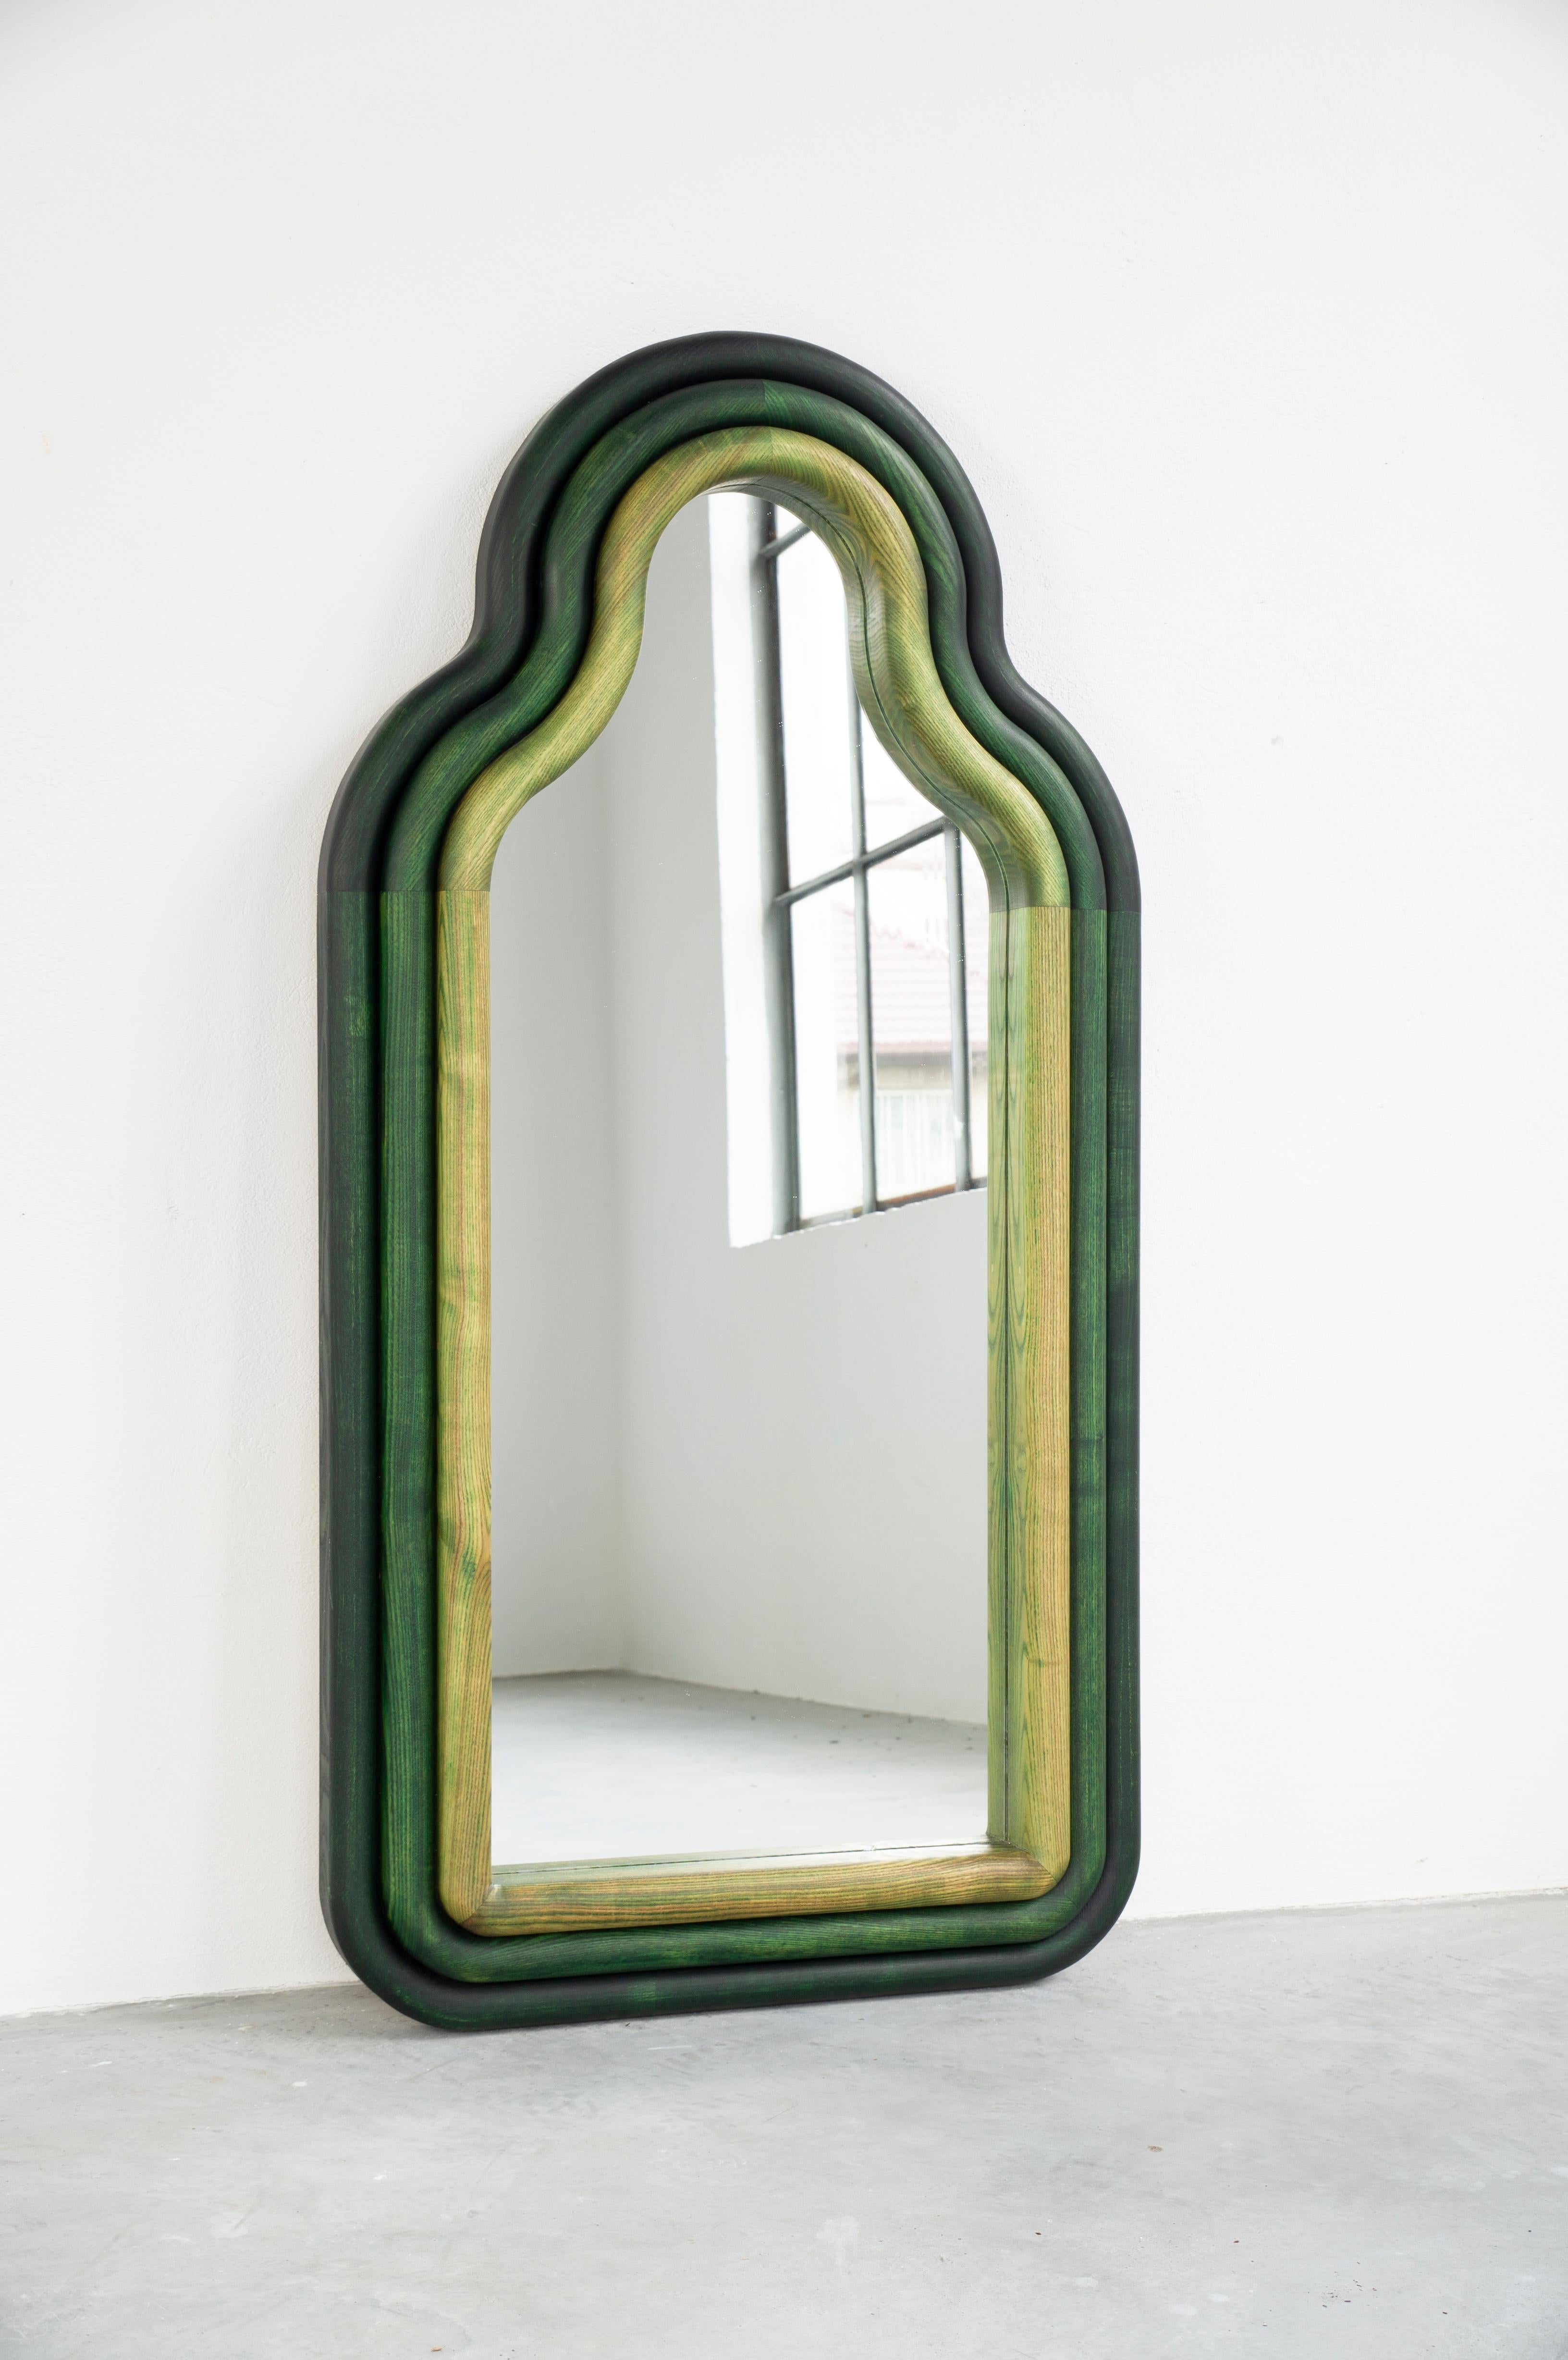 Floor mirror / Wall mirror
Designer: Pani Jurek
Model: TRN Triple
Dimensions: H 193 x 61,5 cm
Materials: Solid ashwood, hand stained
Colors: Dark green

Pani Jurek is a Polish artist and designer who as developed a beautiful collection of